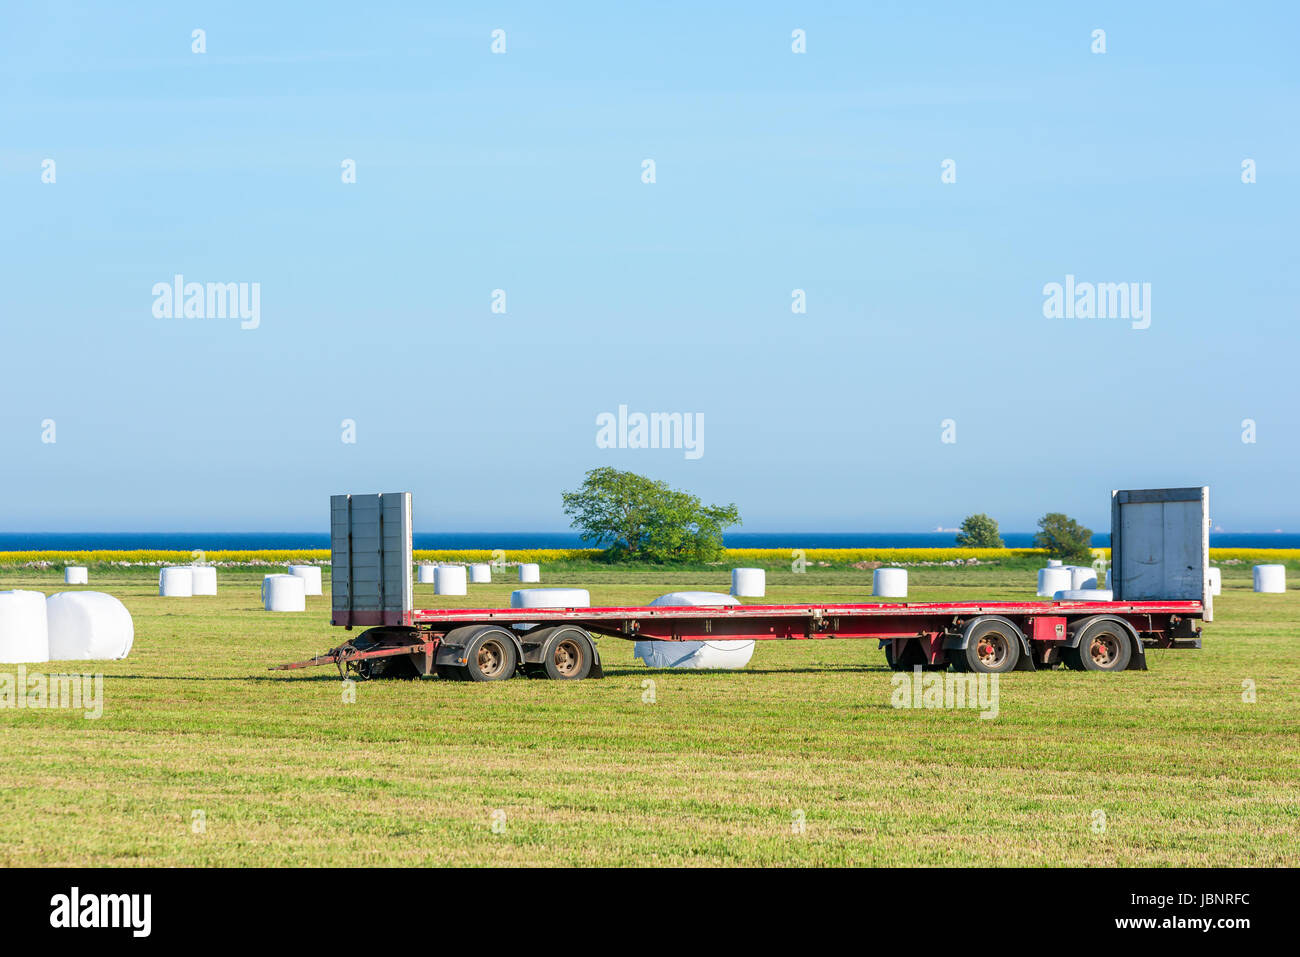 Empty truck trailer parked in a field full of silage bales. The bales are to be loaded on the trailer for later transport. Stock Photo